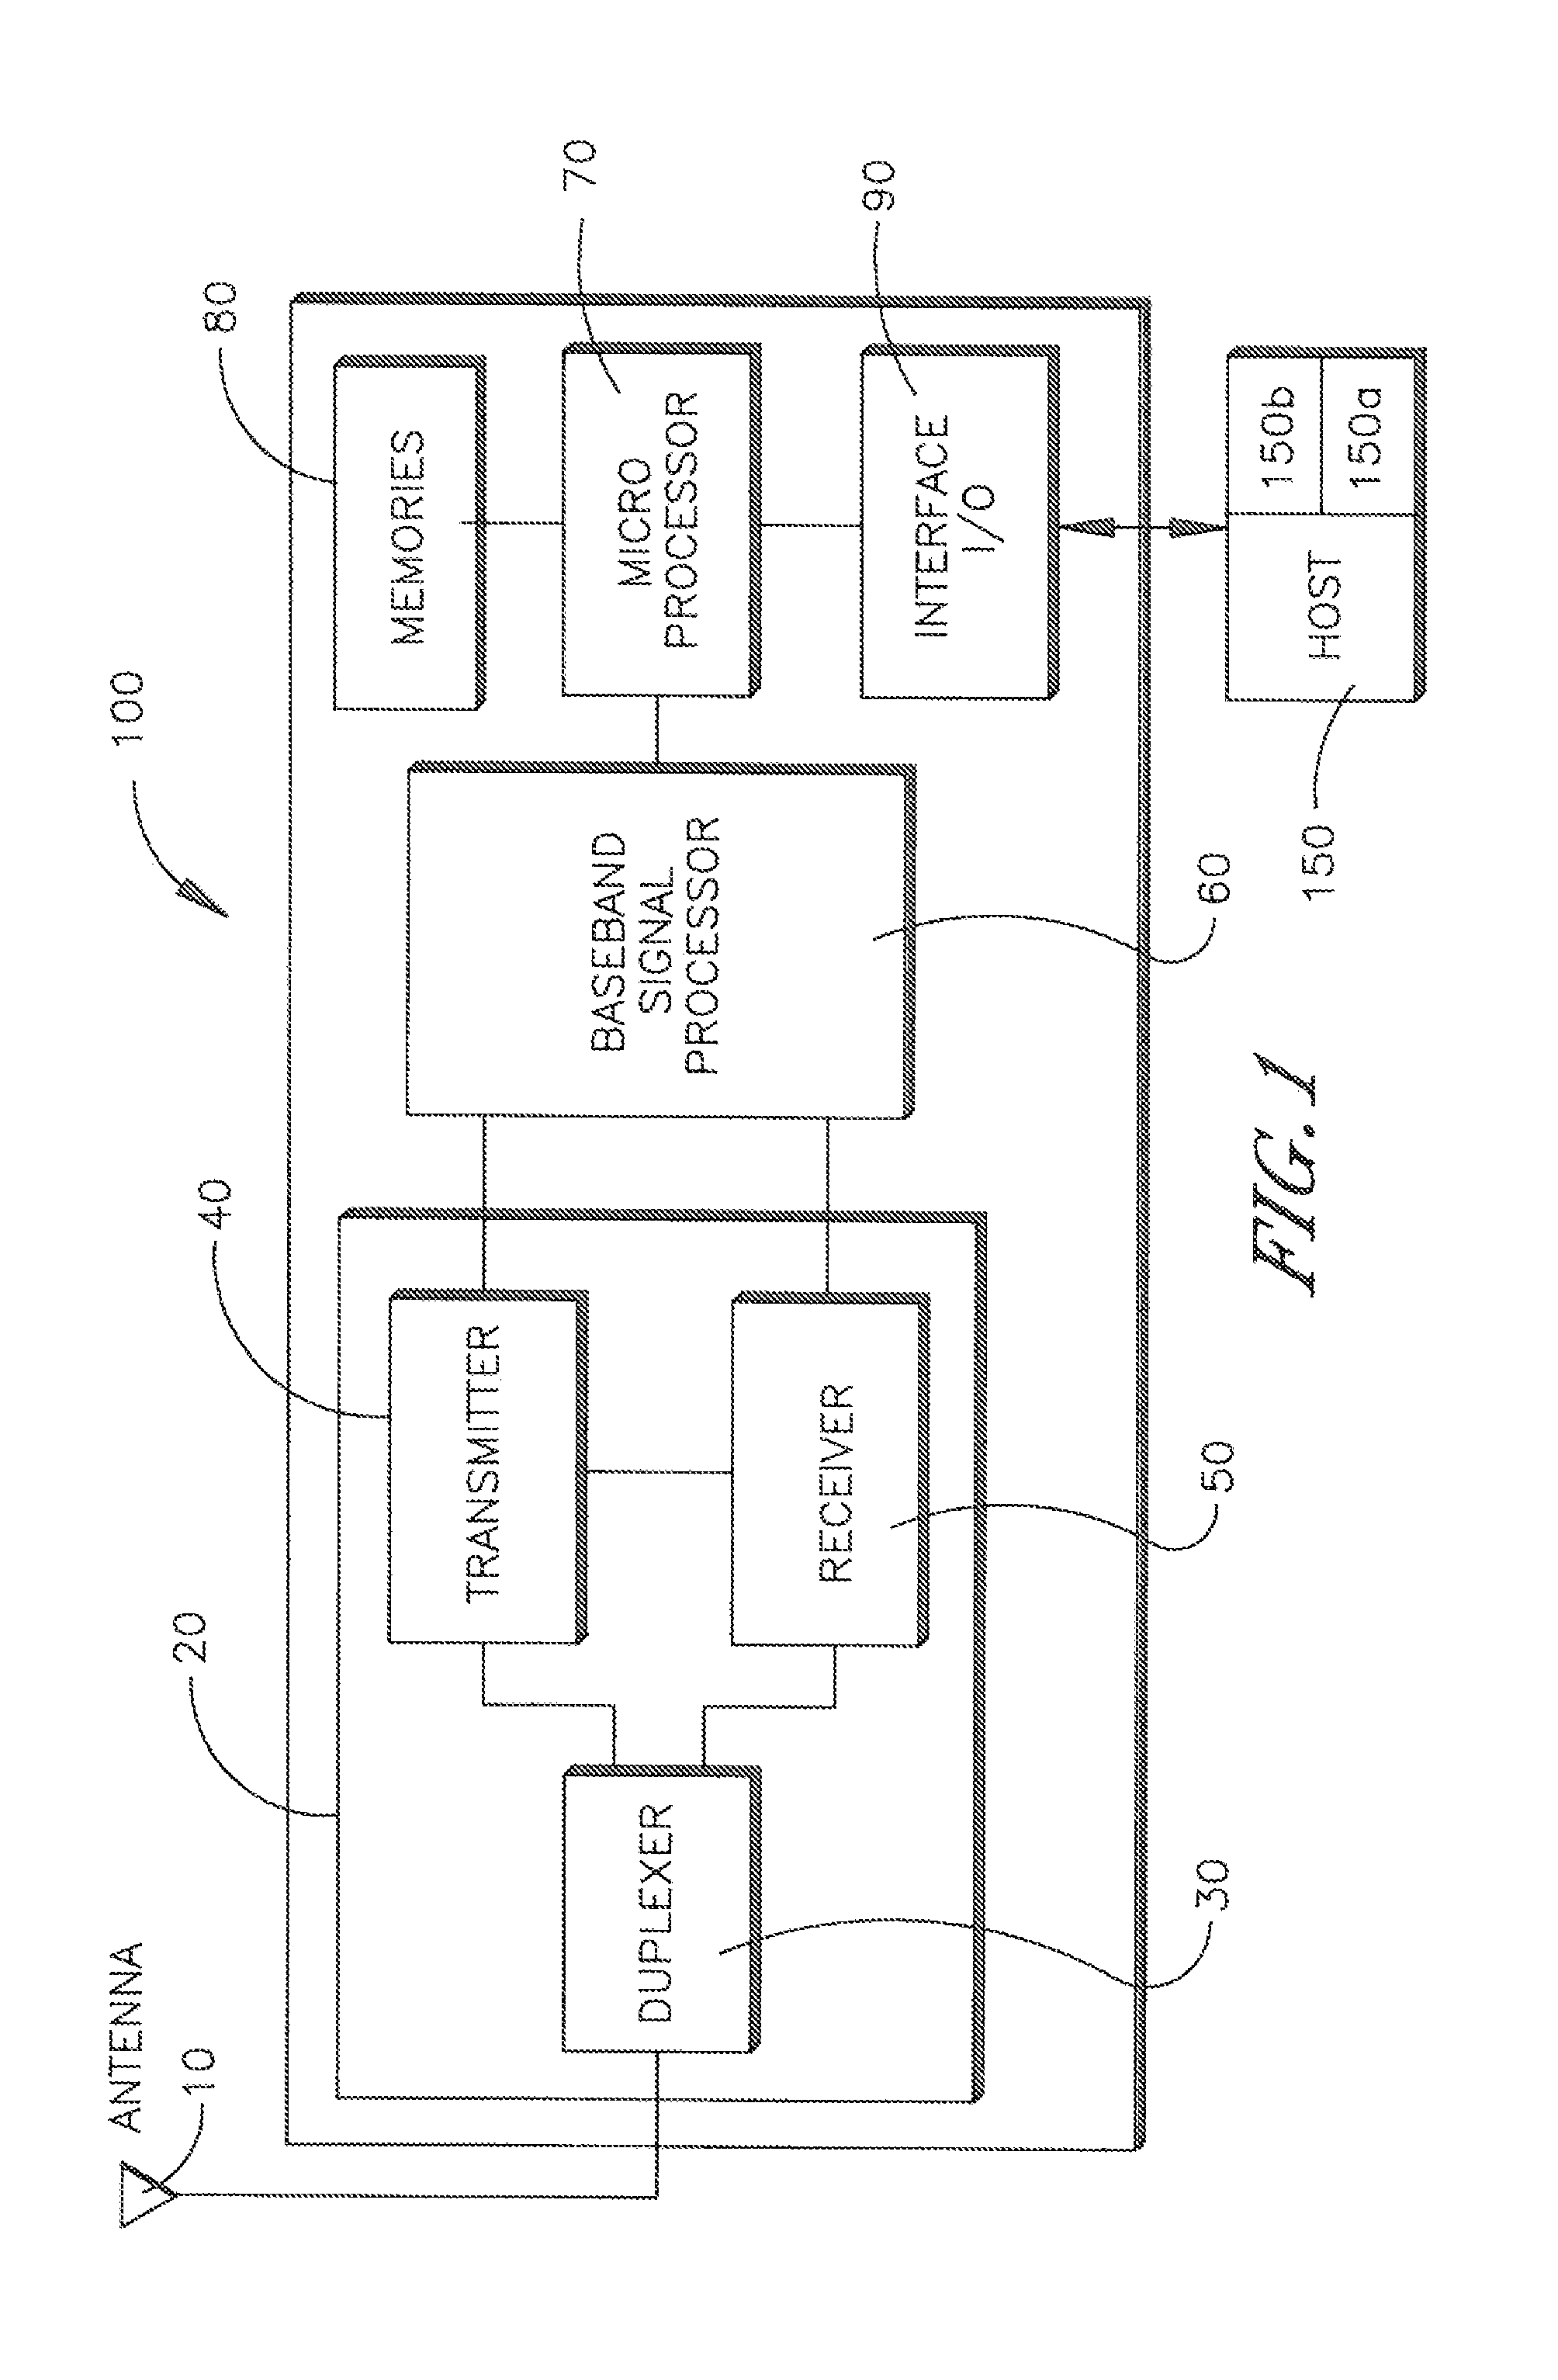 Wireless module security system and method